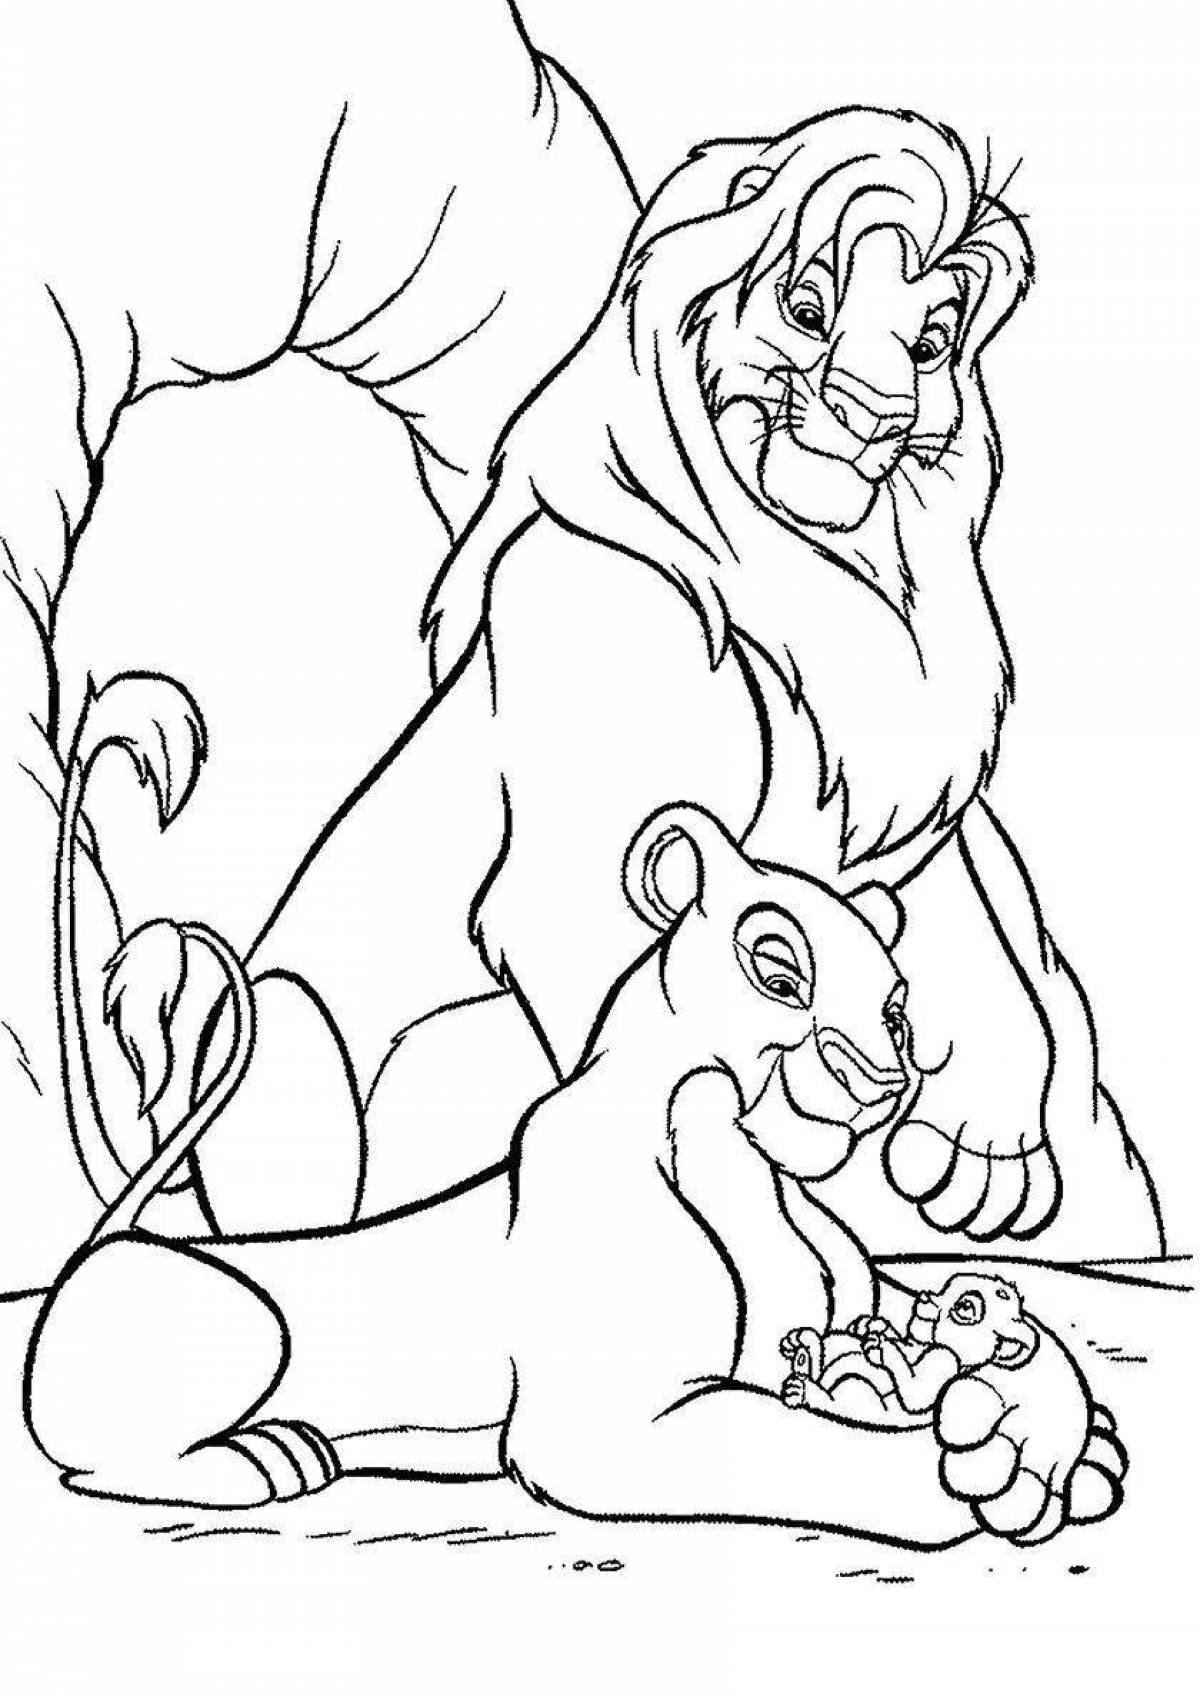 Simba's colorfully illustrated coloring book